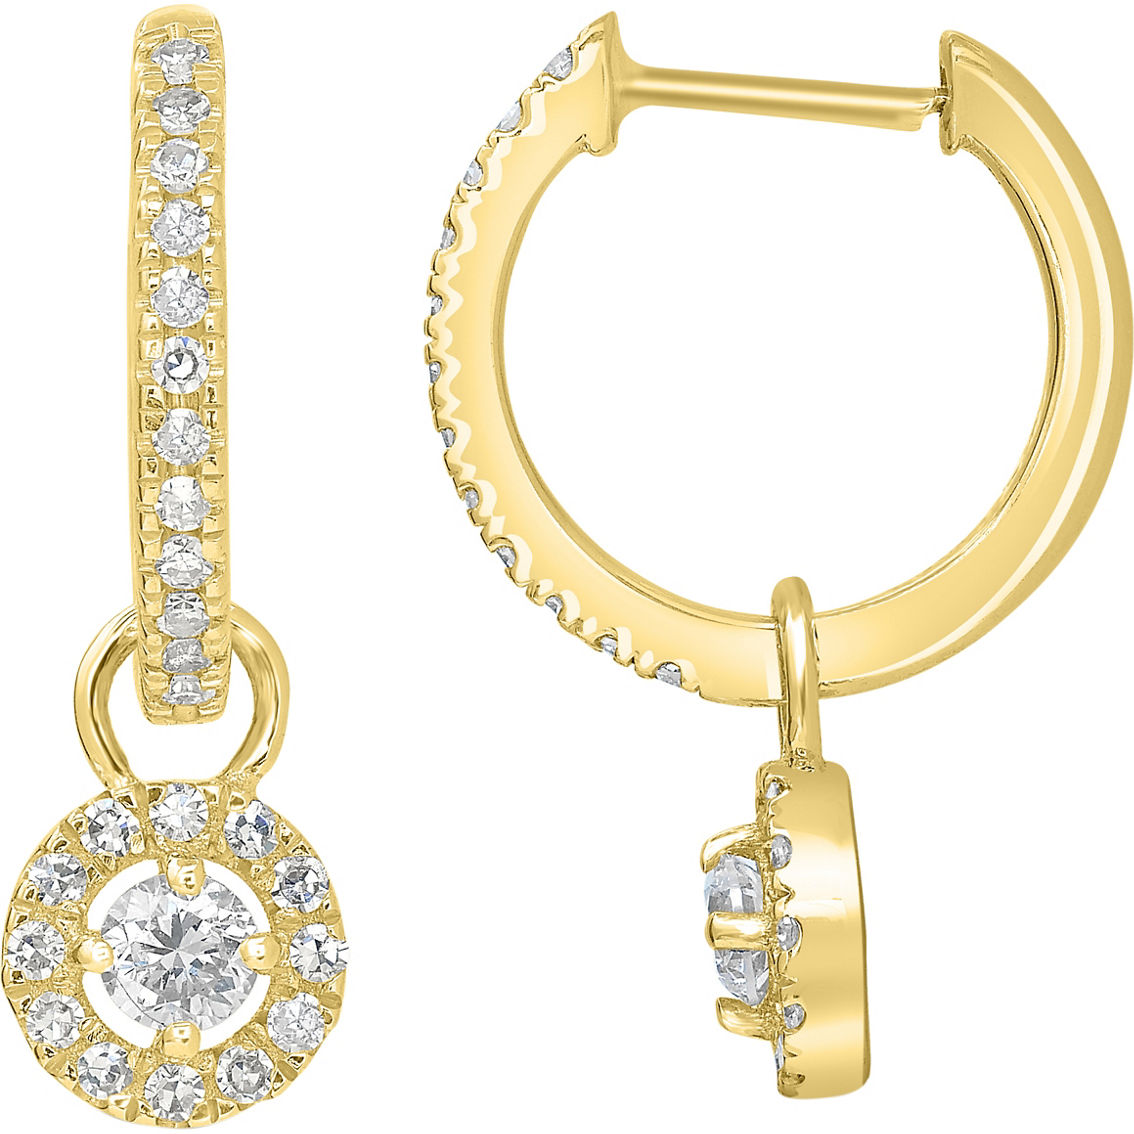 Luxle 14K Yellow Gold 1/4 CTW Pave Diamond Hoop Earrings with Round Halo Drop - Image 2 of 4